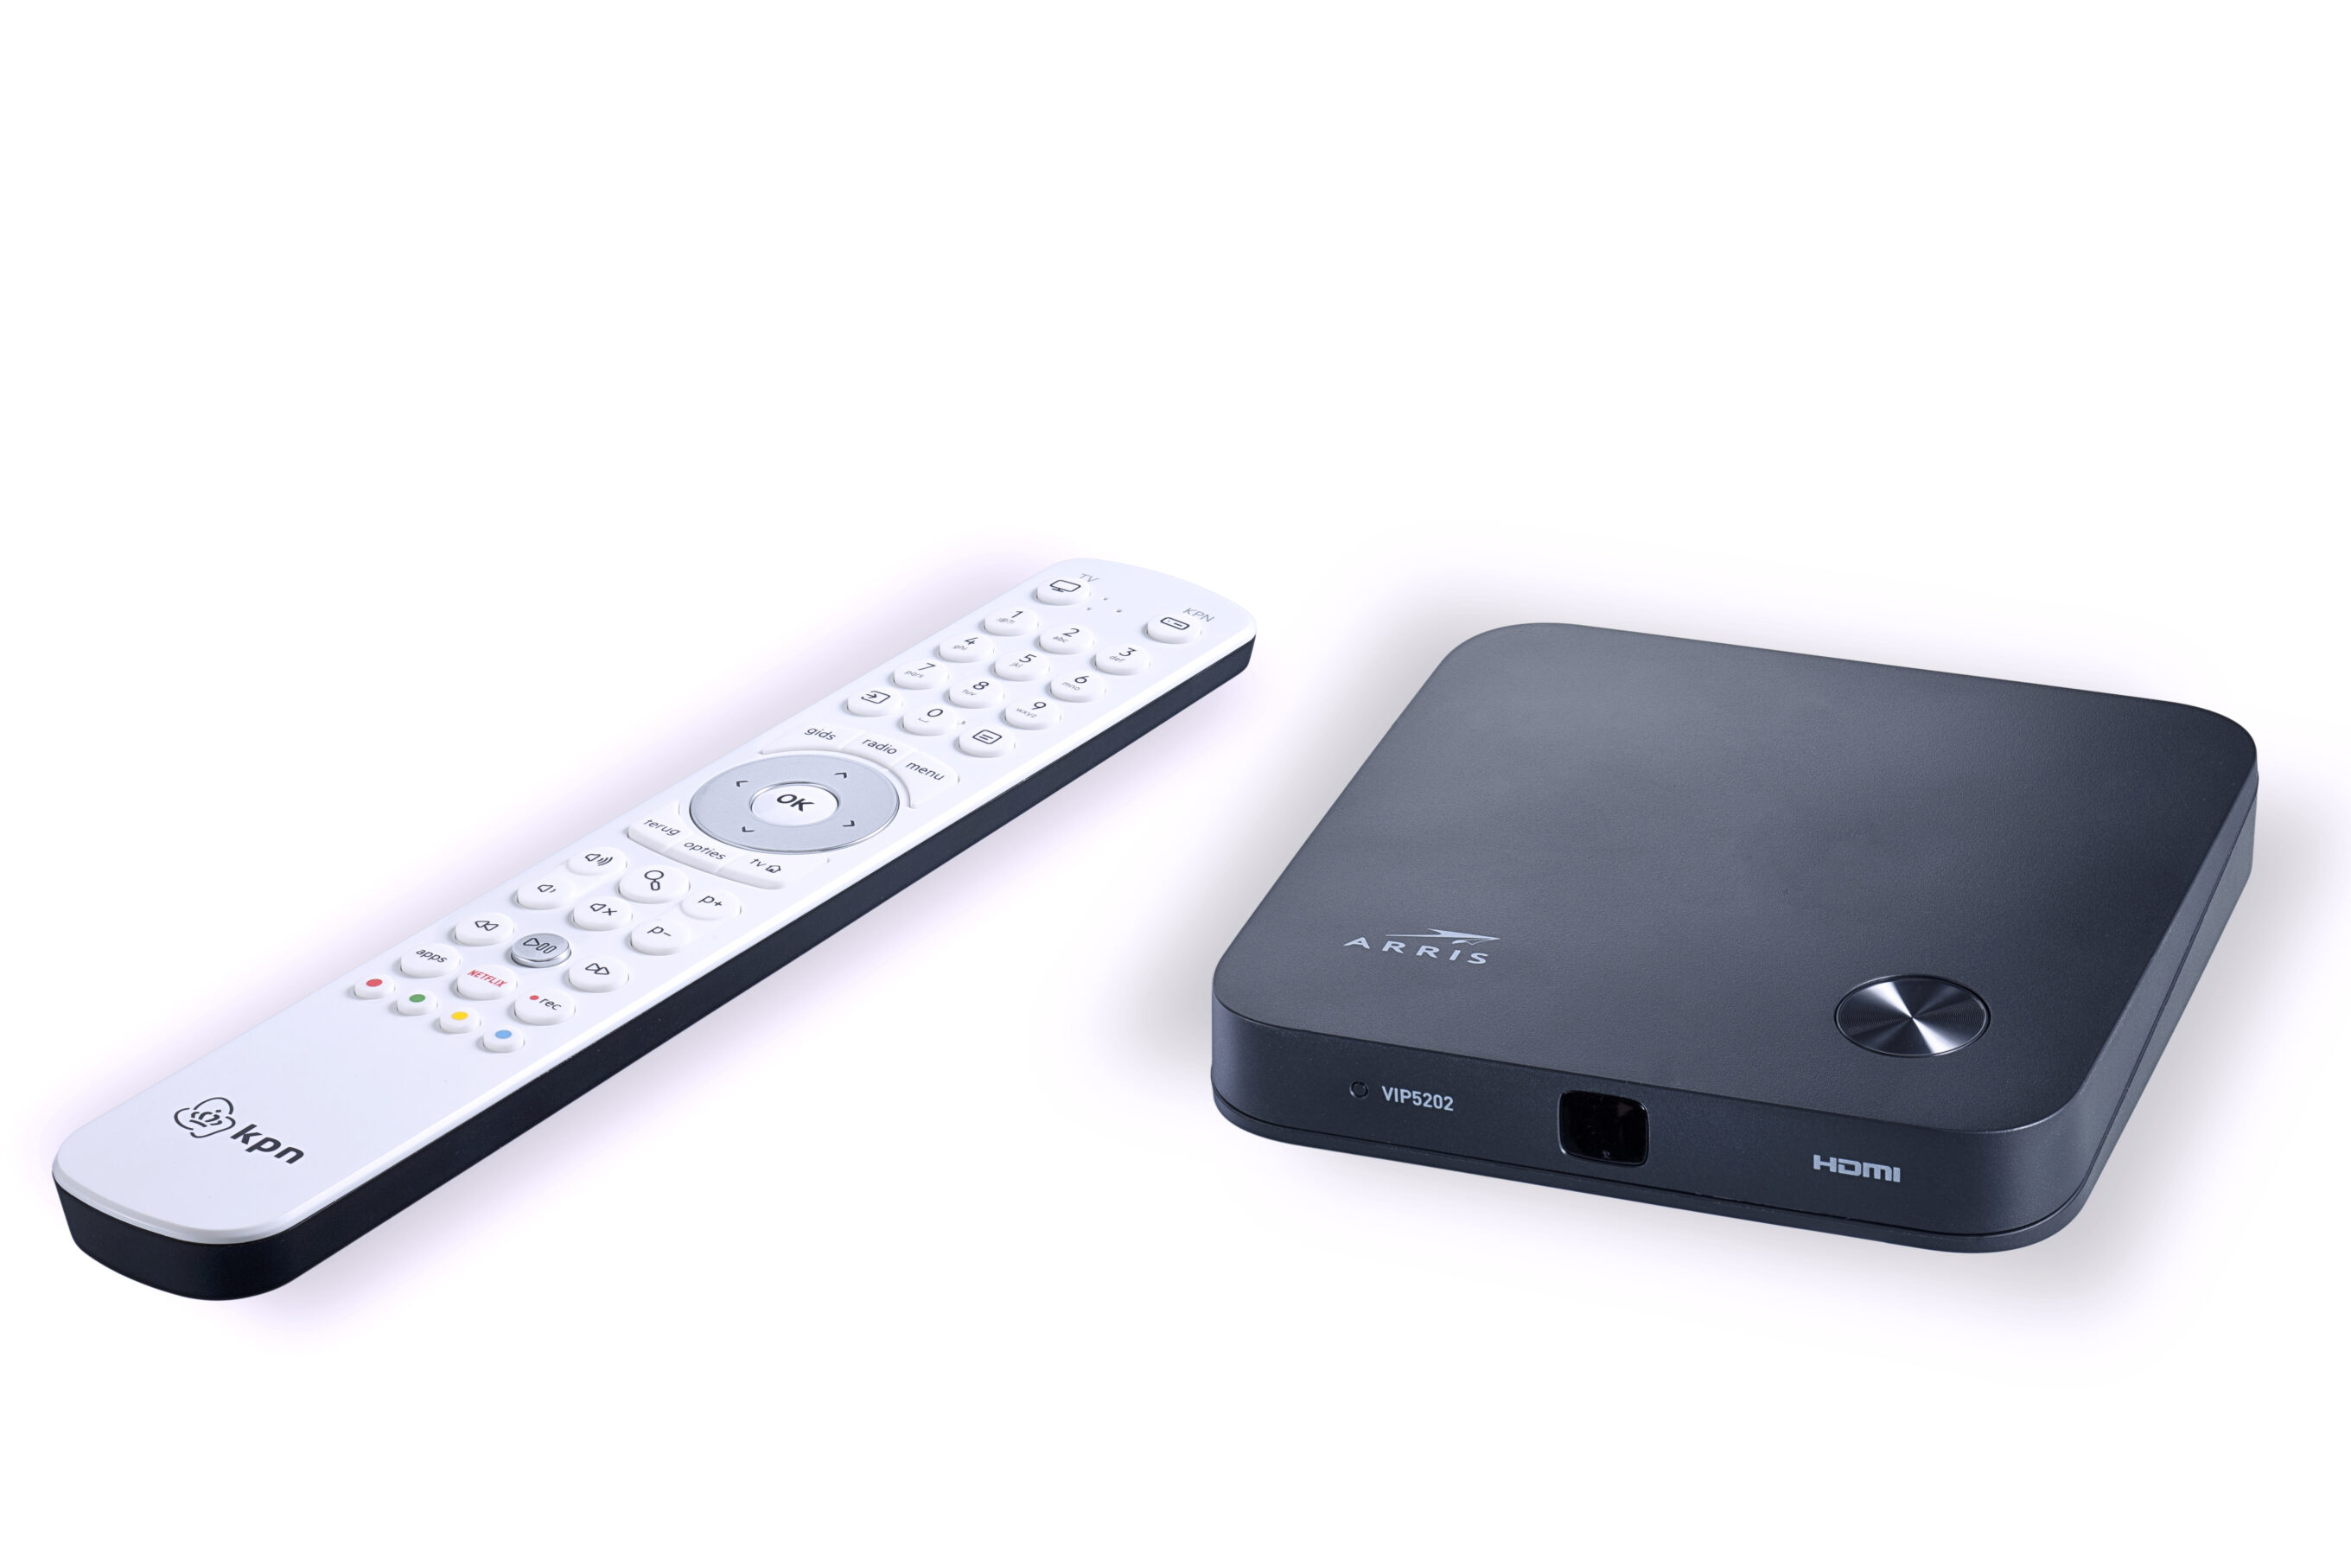 KPN introduces new TV box with Bluetooth remote control | Digital TV News